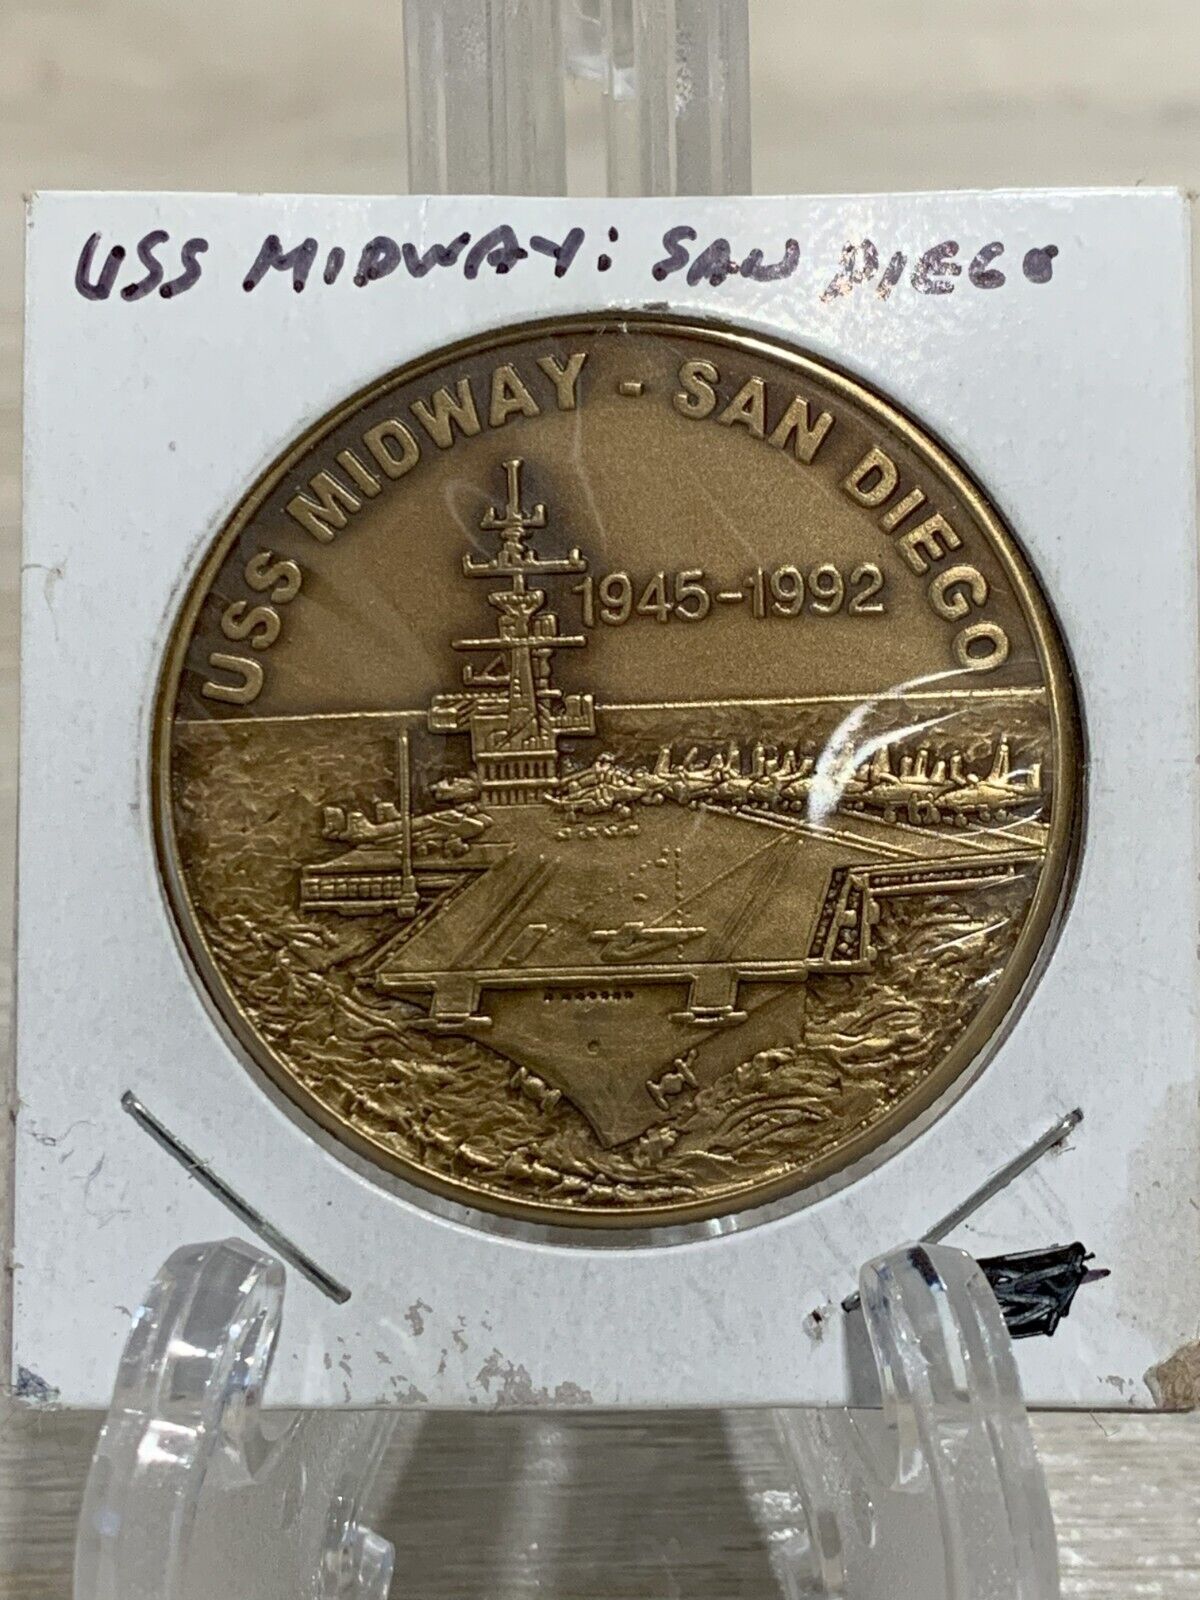 USS Midway CV41 Medal Launched 1945 Decommissioned 1992, San Diego, Ca. Museum